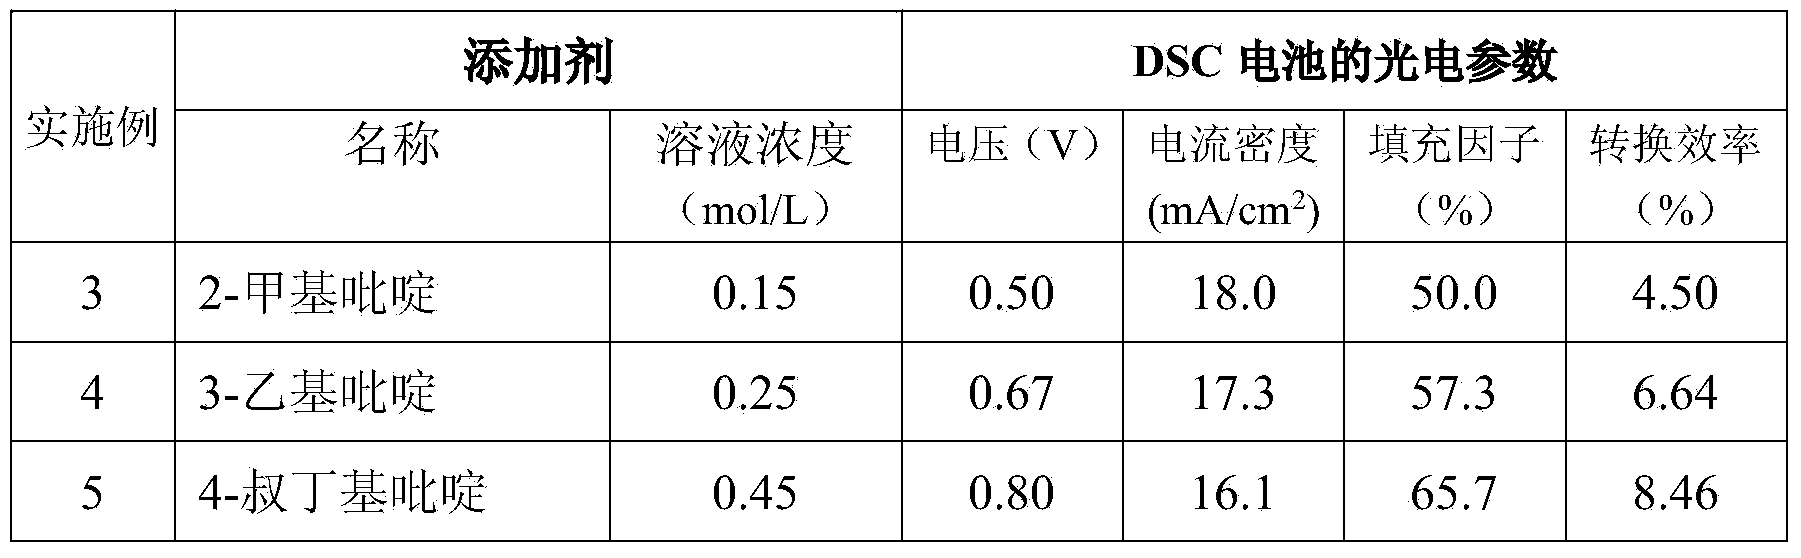 DSC battery manufacturing electrolyte solution